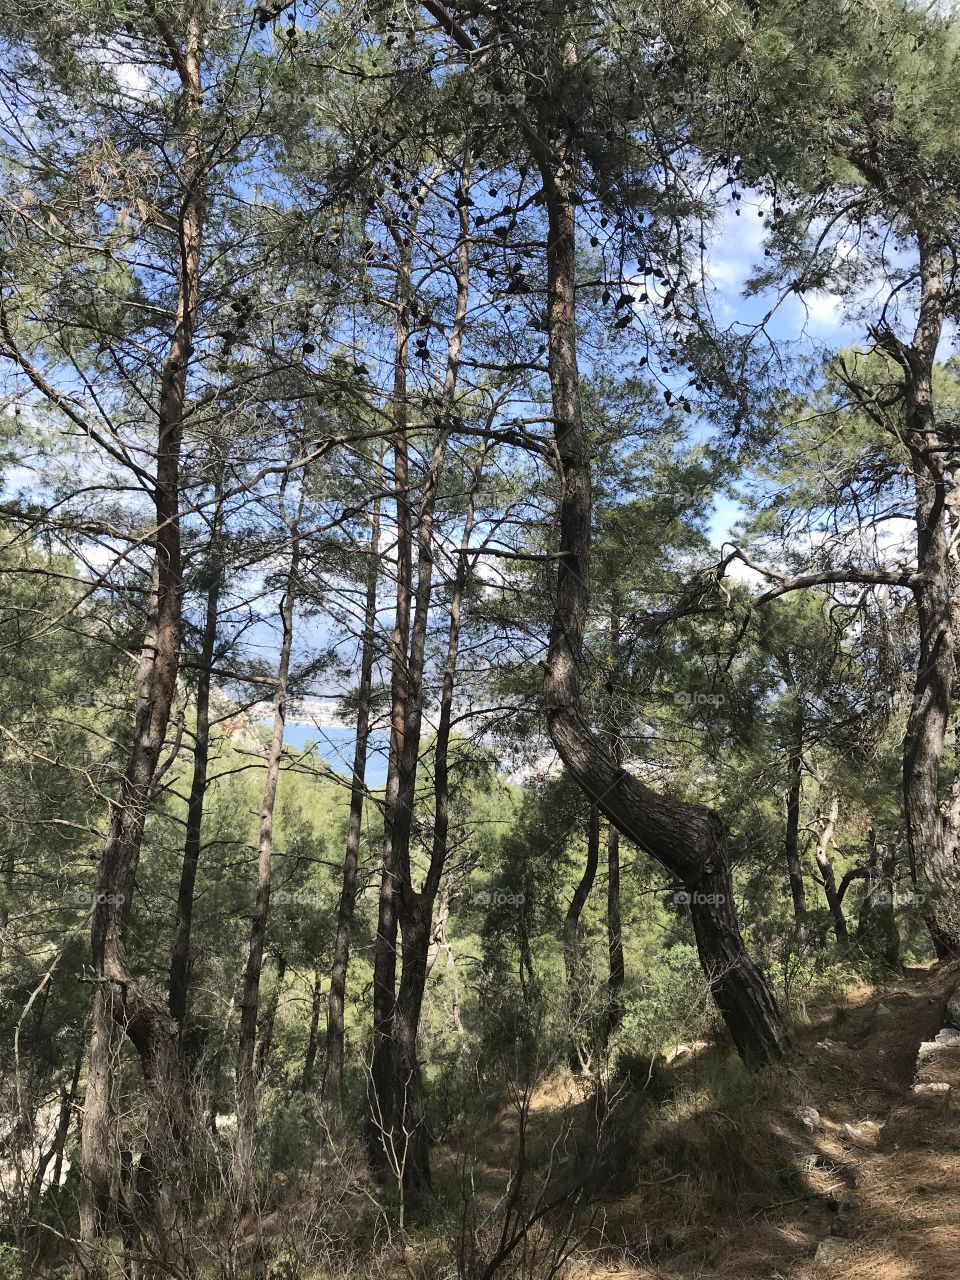 On the ancient walking path in Fethiye